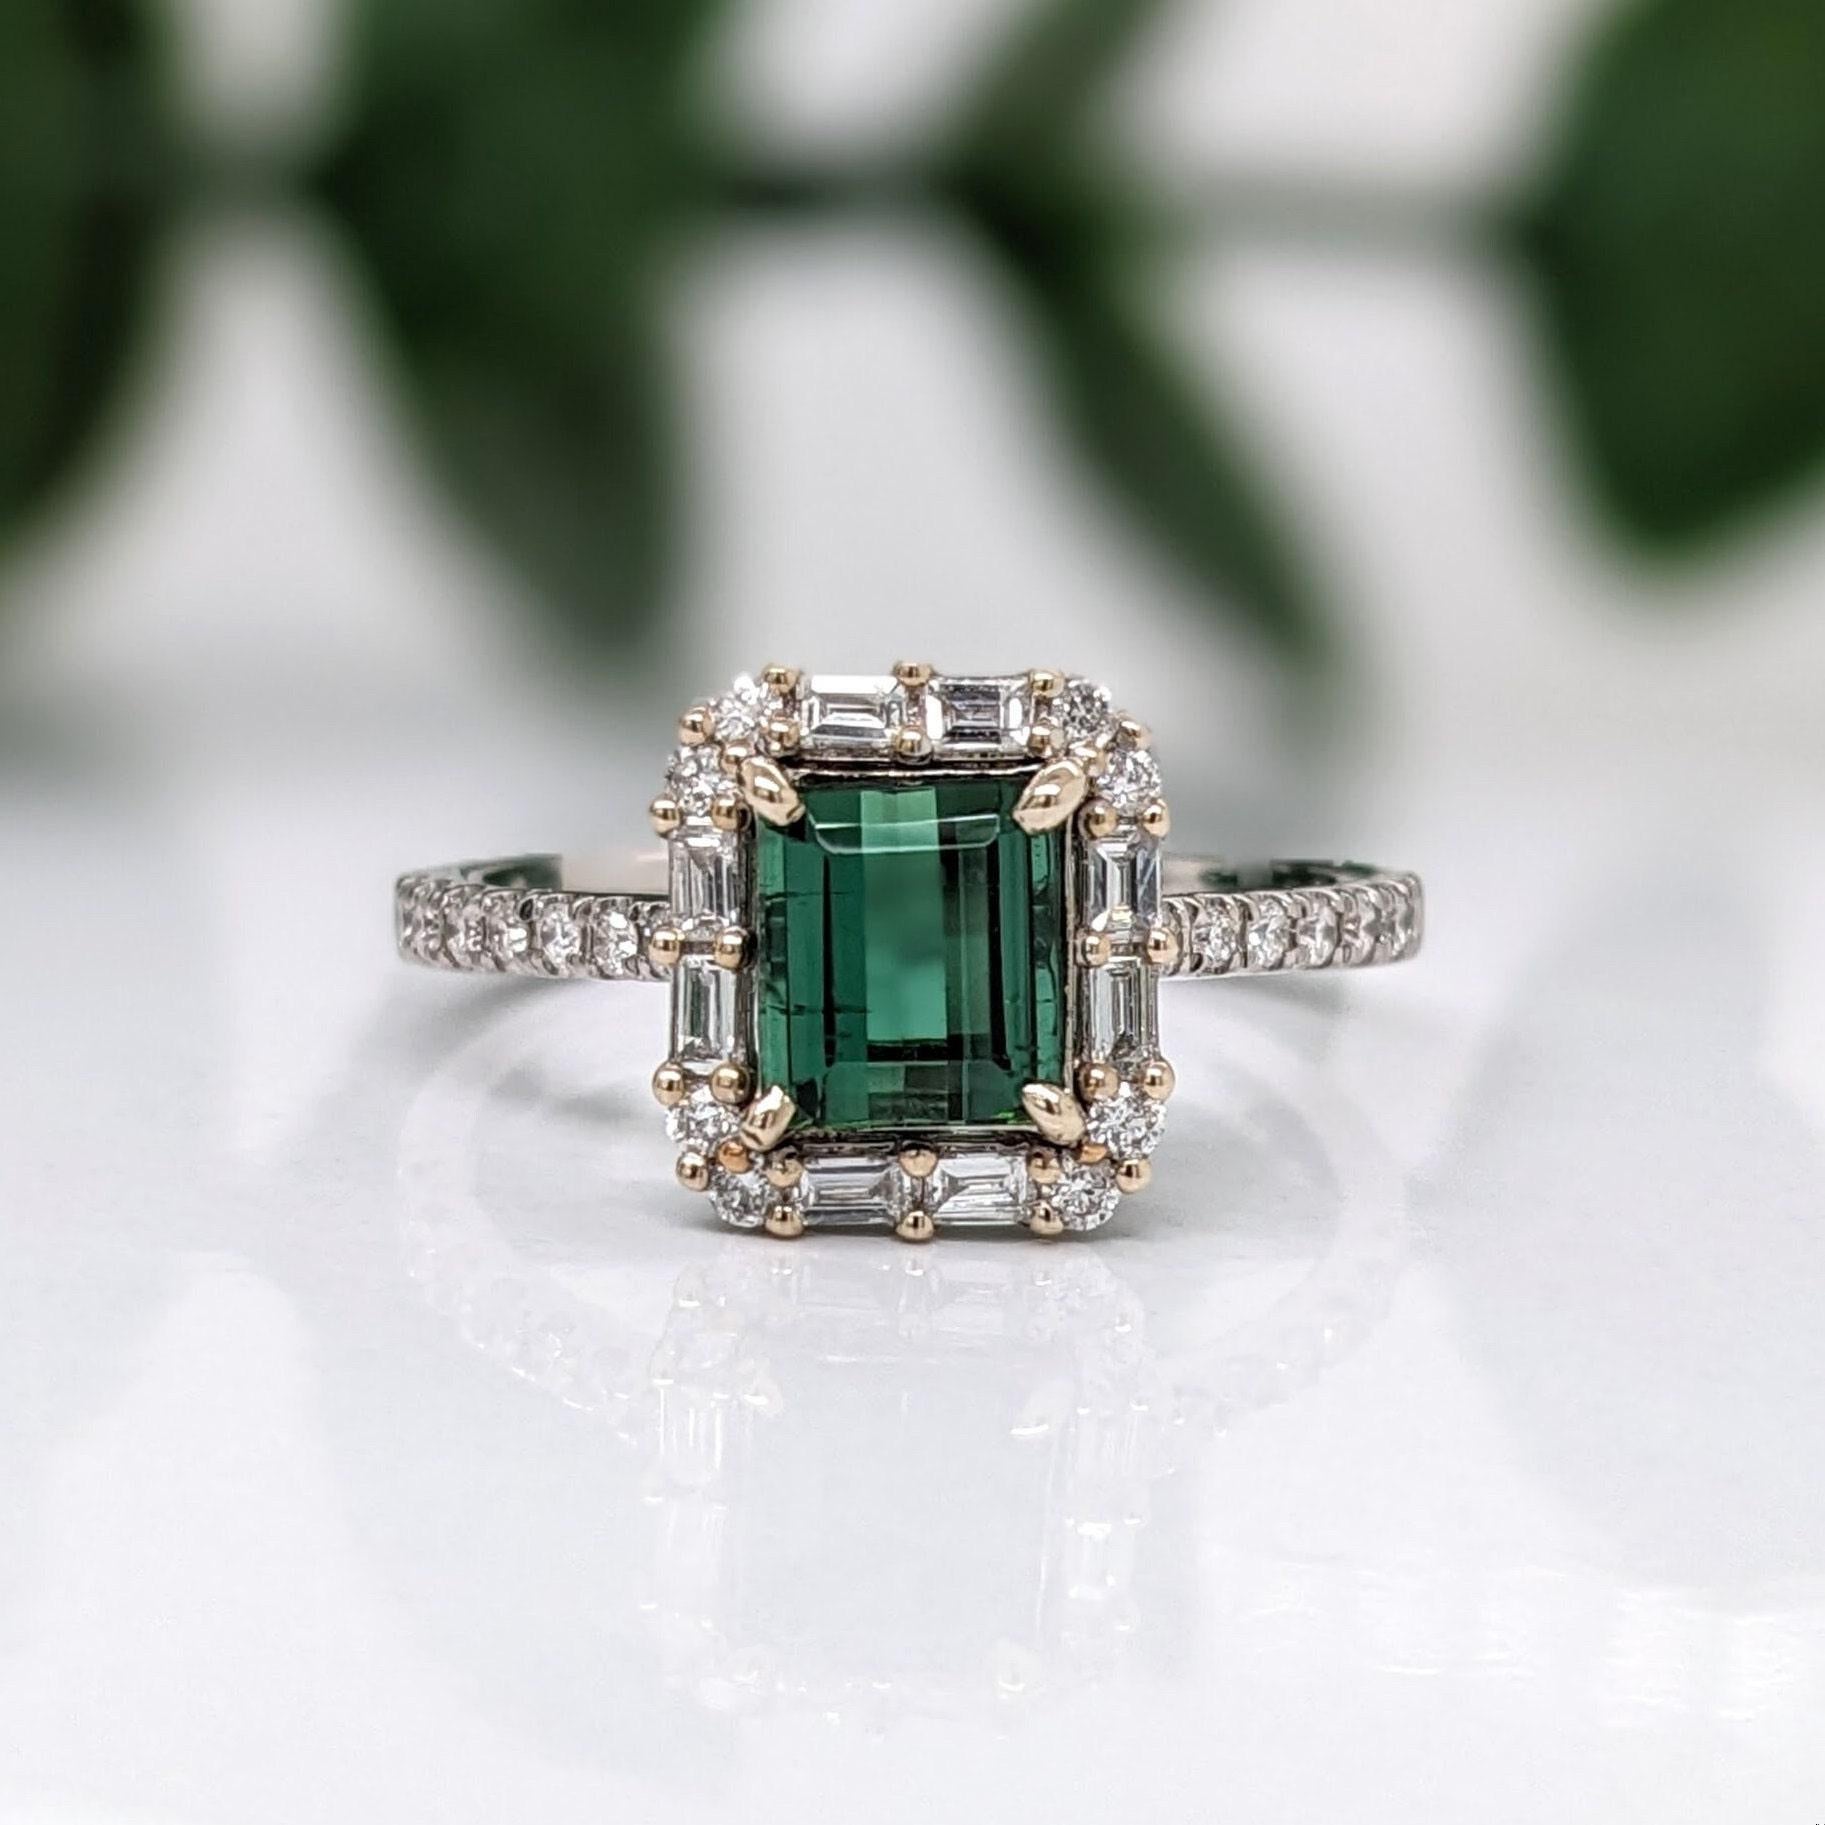 This beautiful art deco ring features a vibrant green tourmaline set in 14k white gold with round and baguette diamond accents. A gorgeous deep green gemstone that rivals in looks with the finest emeralds in color and clarity, but for a fraction of